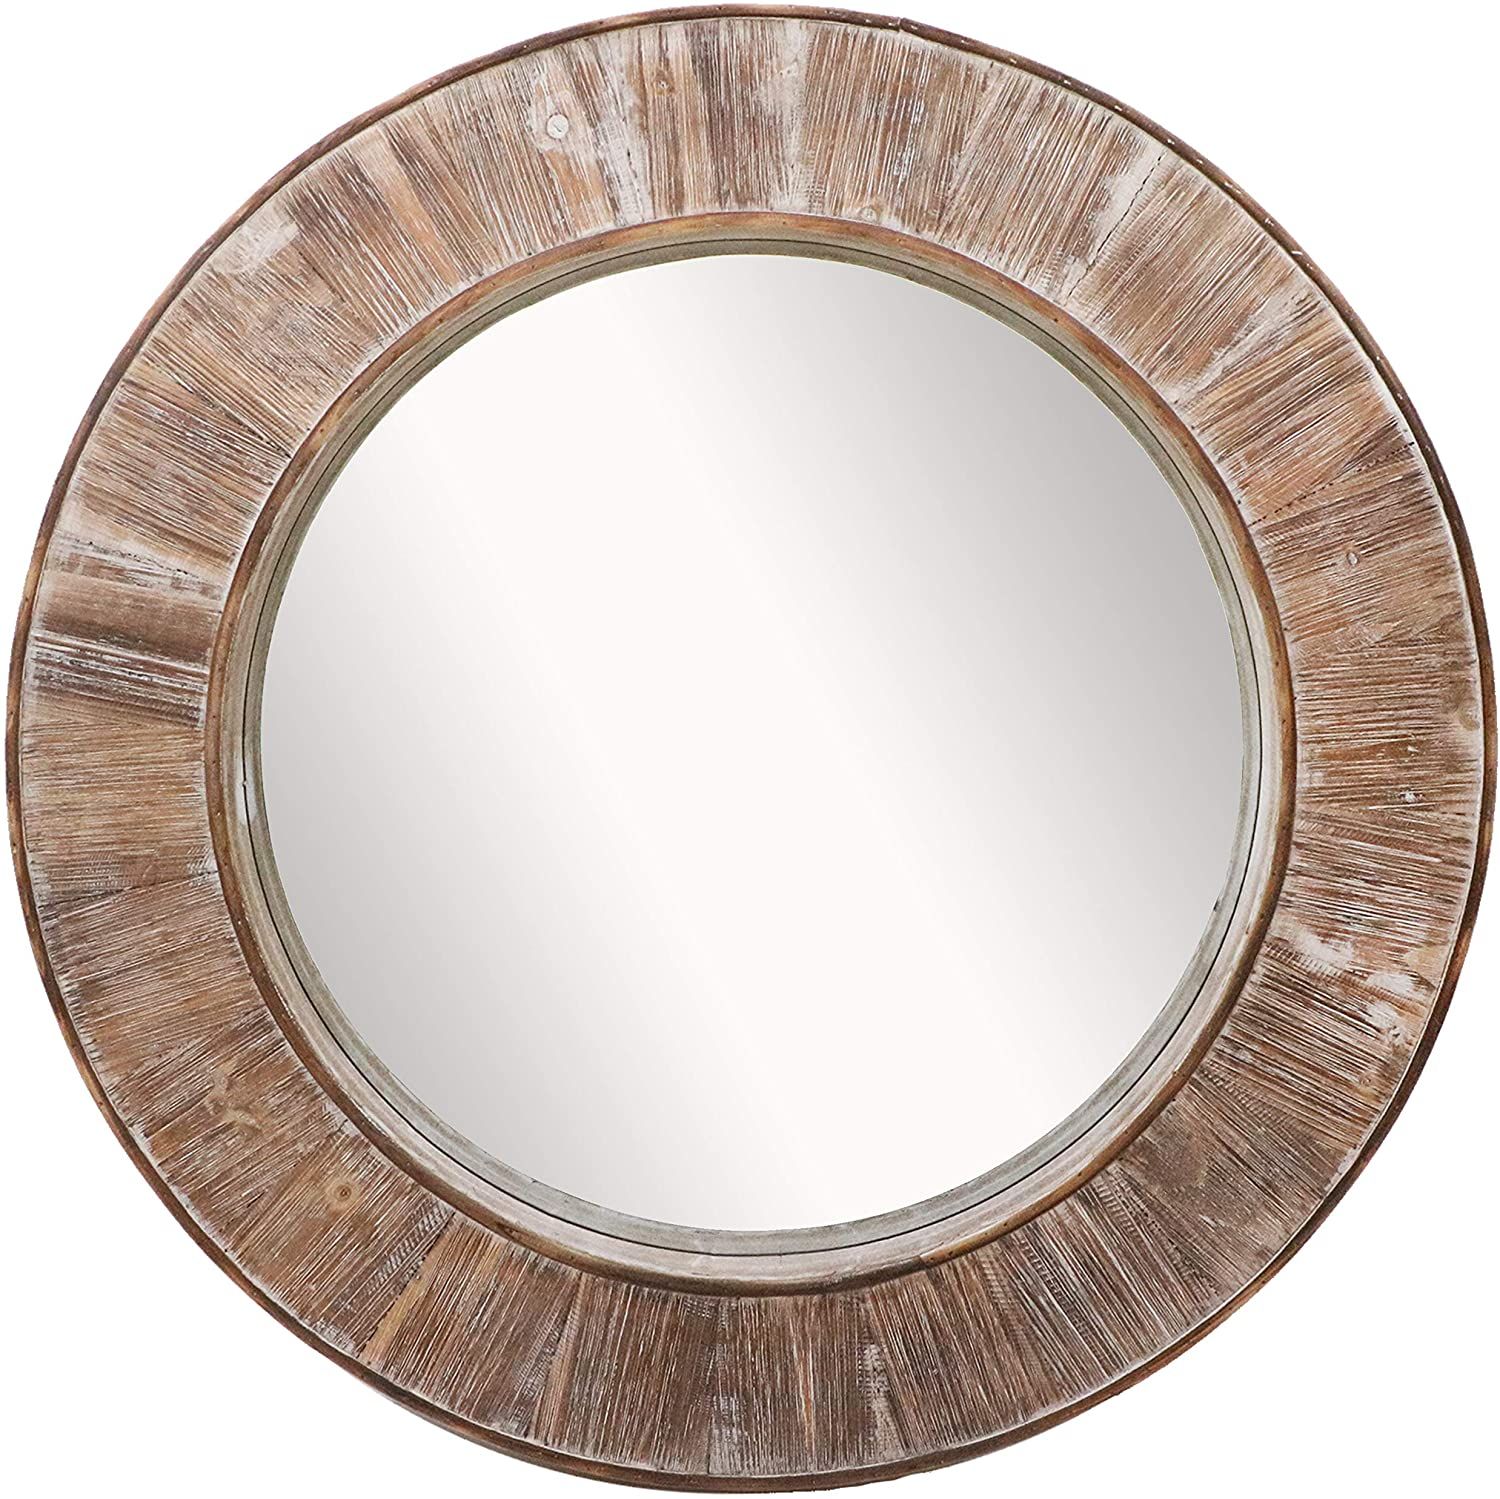 Barnyard Designs Round Decorative Wall Hanging Mirror Large Wooden With Organic Natural Wood Round Wall Mirrors (View 11 of 15)